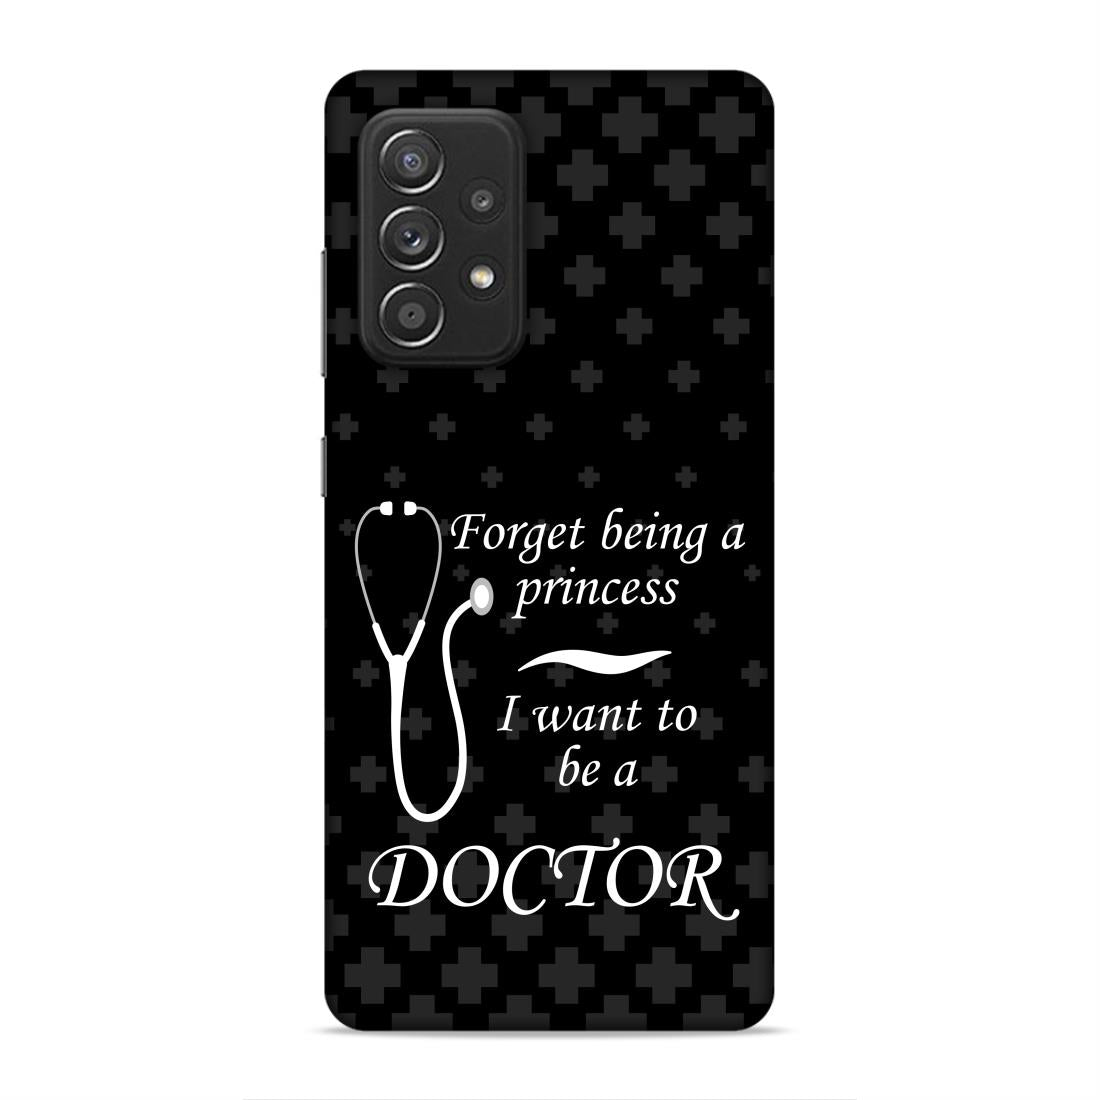 Forget Princess Be Doctor Hard Back Case For Samsung Galaxy A52 / A52s 5G